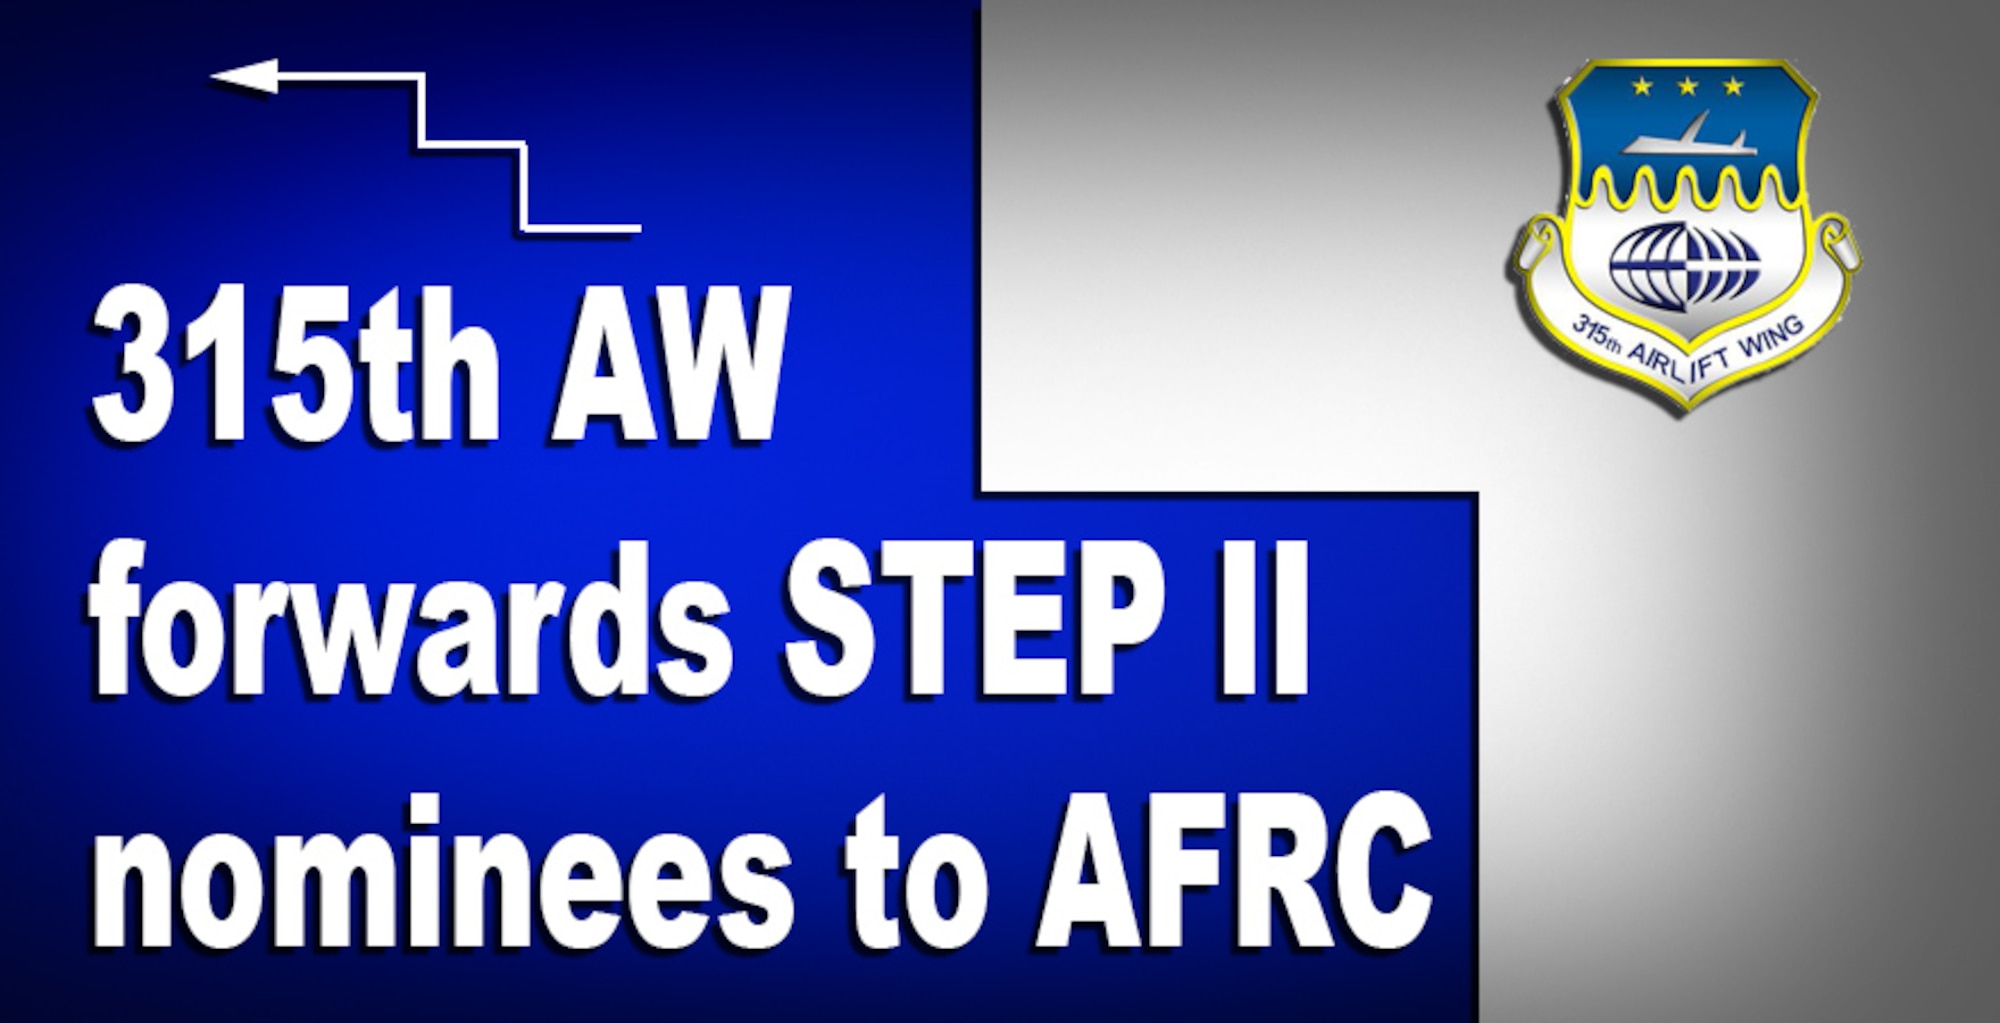 Wing forwards STEPII nominees to AFRC